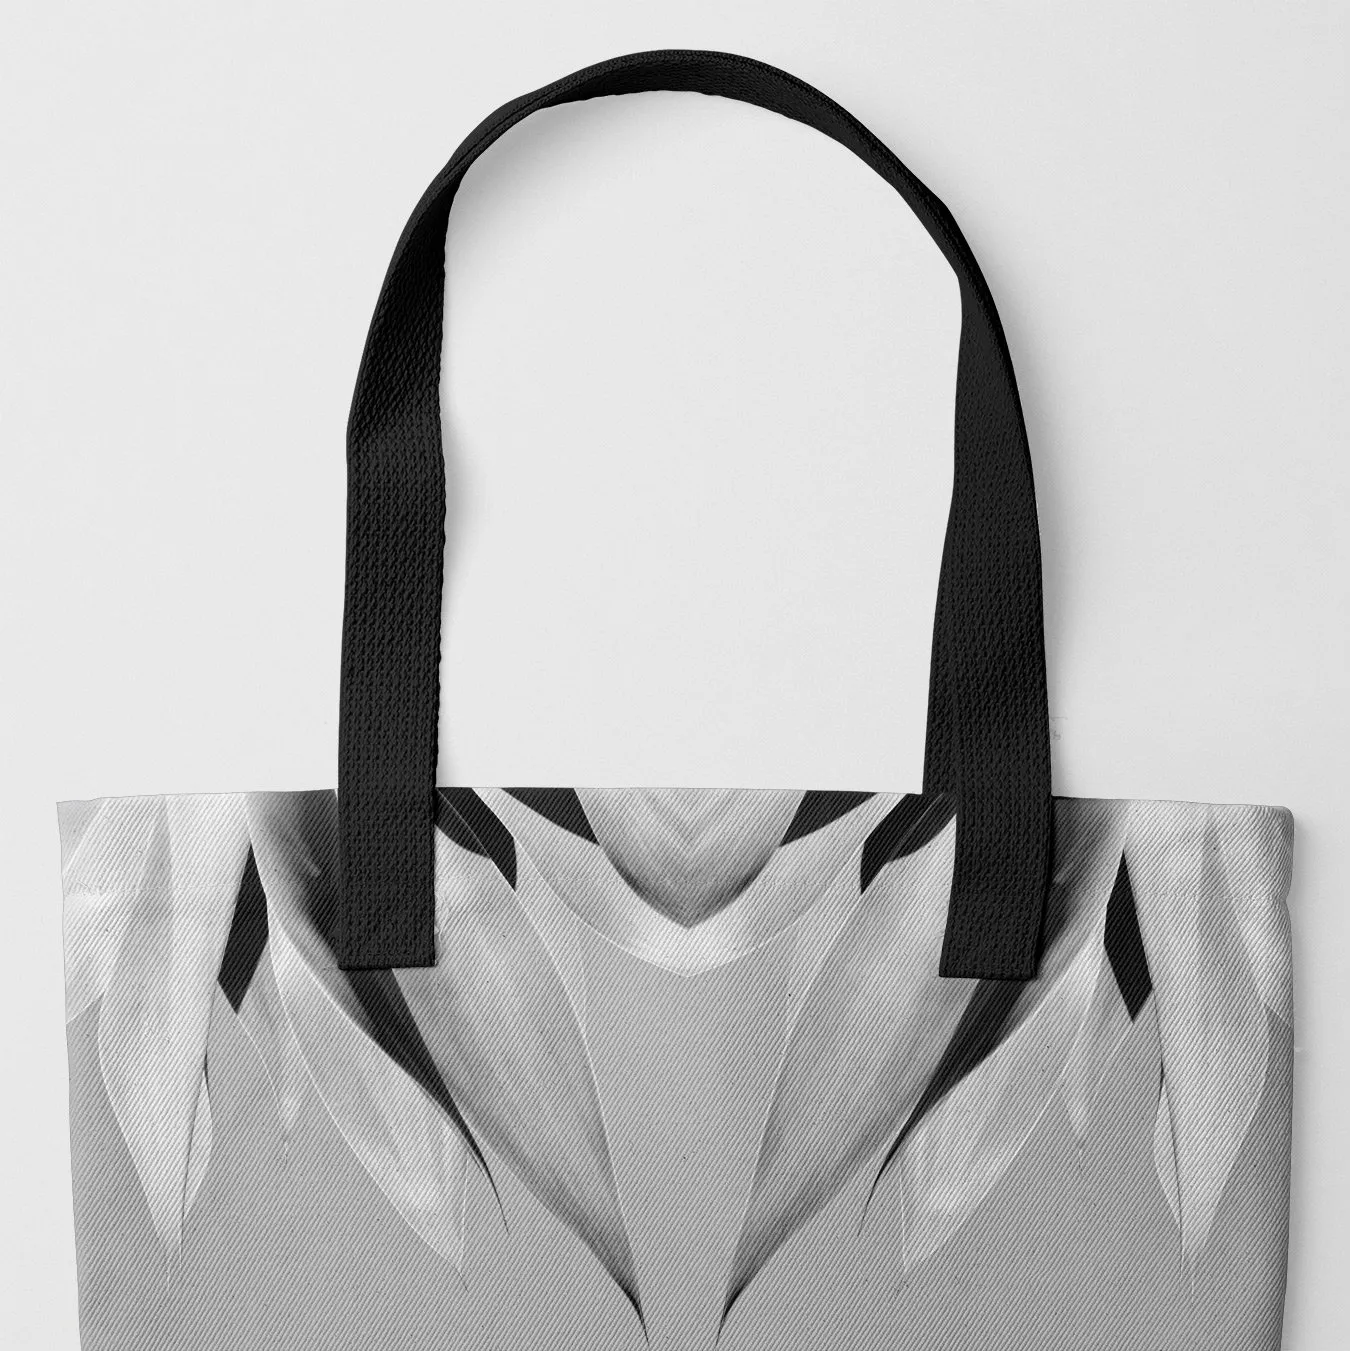 In Bloom / Bloom In Tote Black And White - Heavy Duty Reusable Grocery Bag - Black Handles - Shopping Totes - Aesthetic